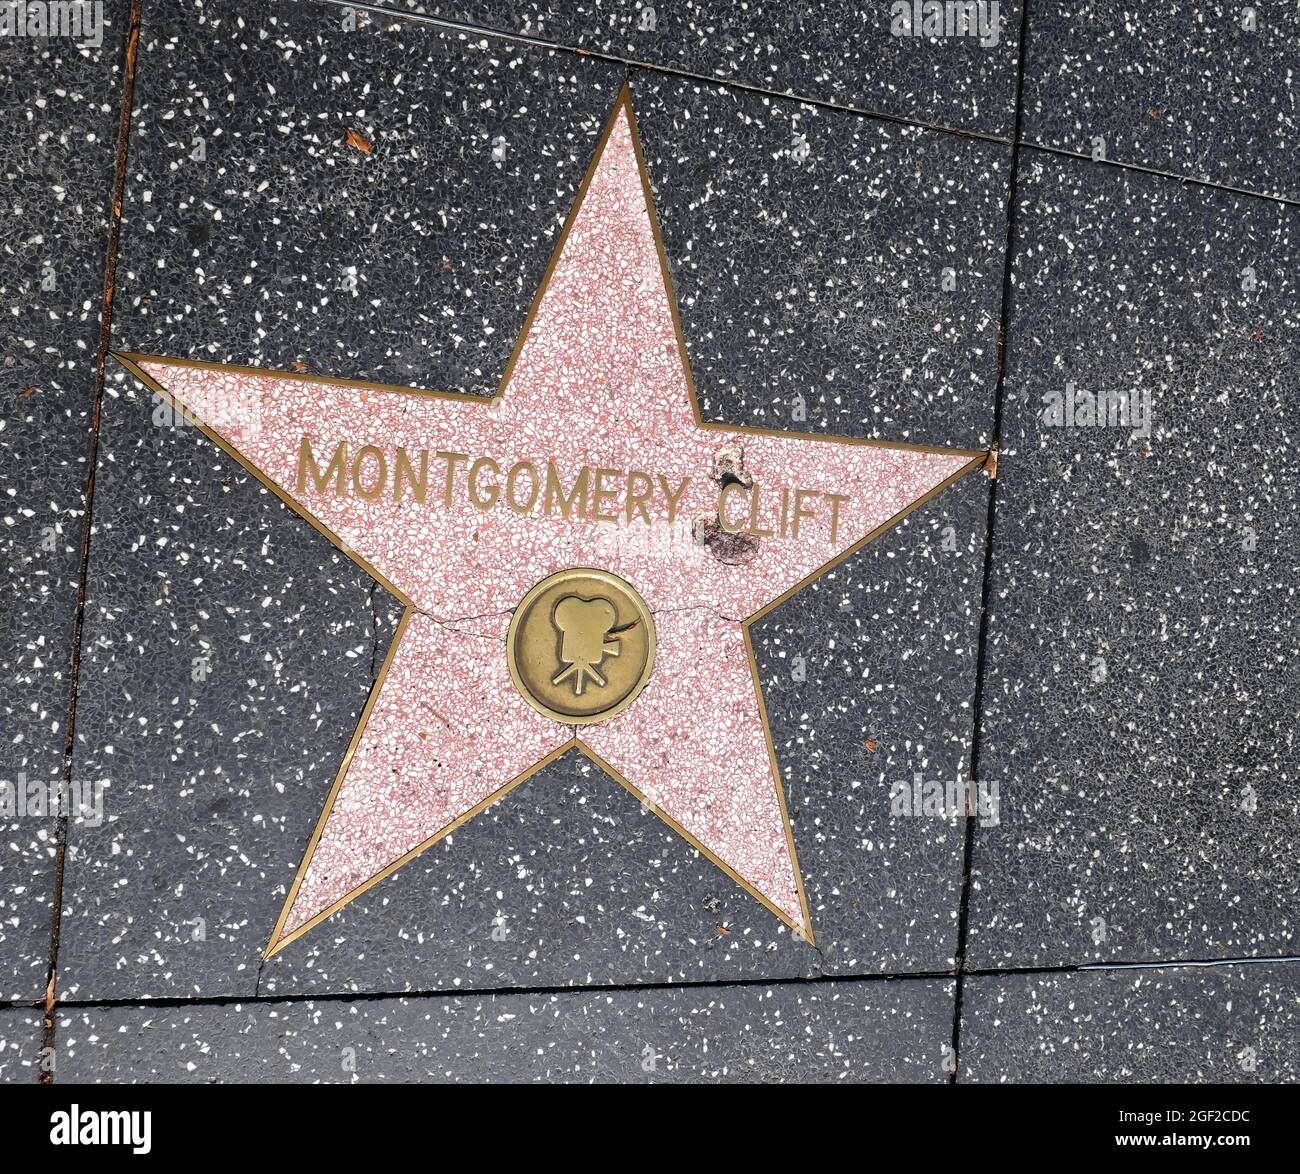 Hollywood, California, USA 17th August 2021 A general view of atmosphere of actor Montgomery Clift's Star on Hollywood Walk of Fame on August 17, 2021 in Hollywood, California, USA. Photo by Barry King/Alamy Stock Photo Stock Photo